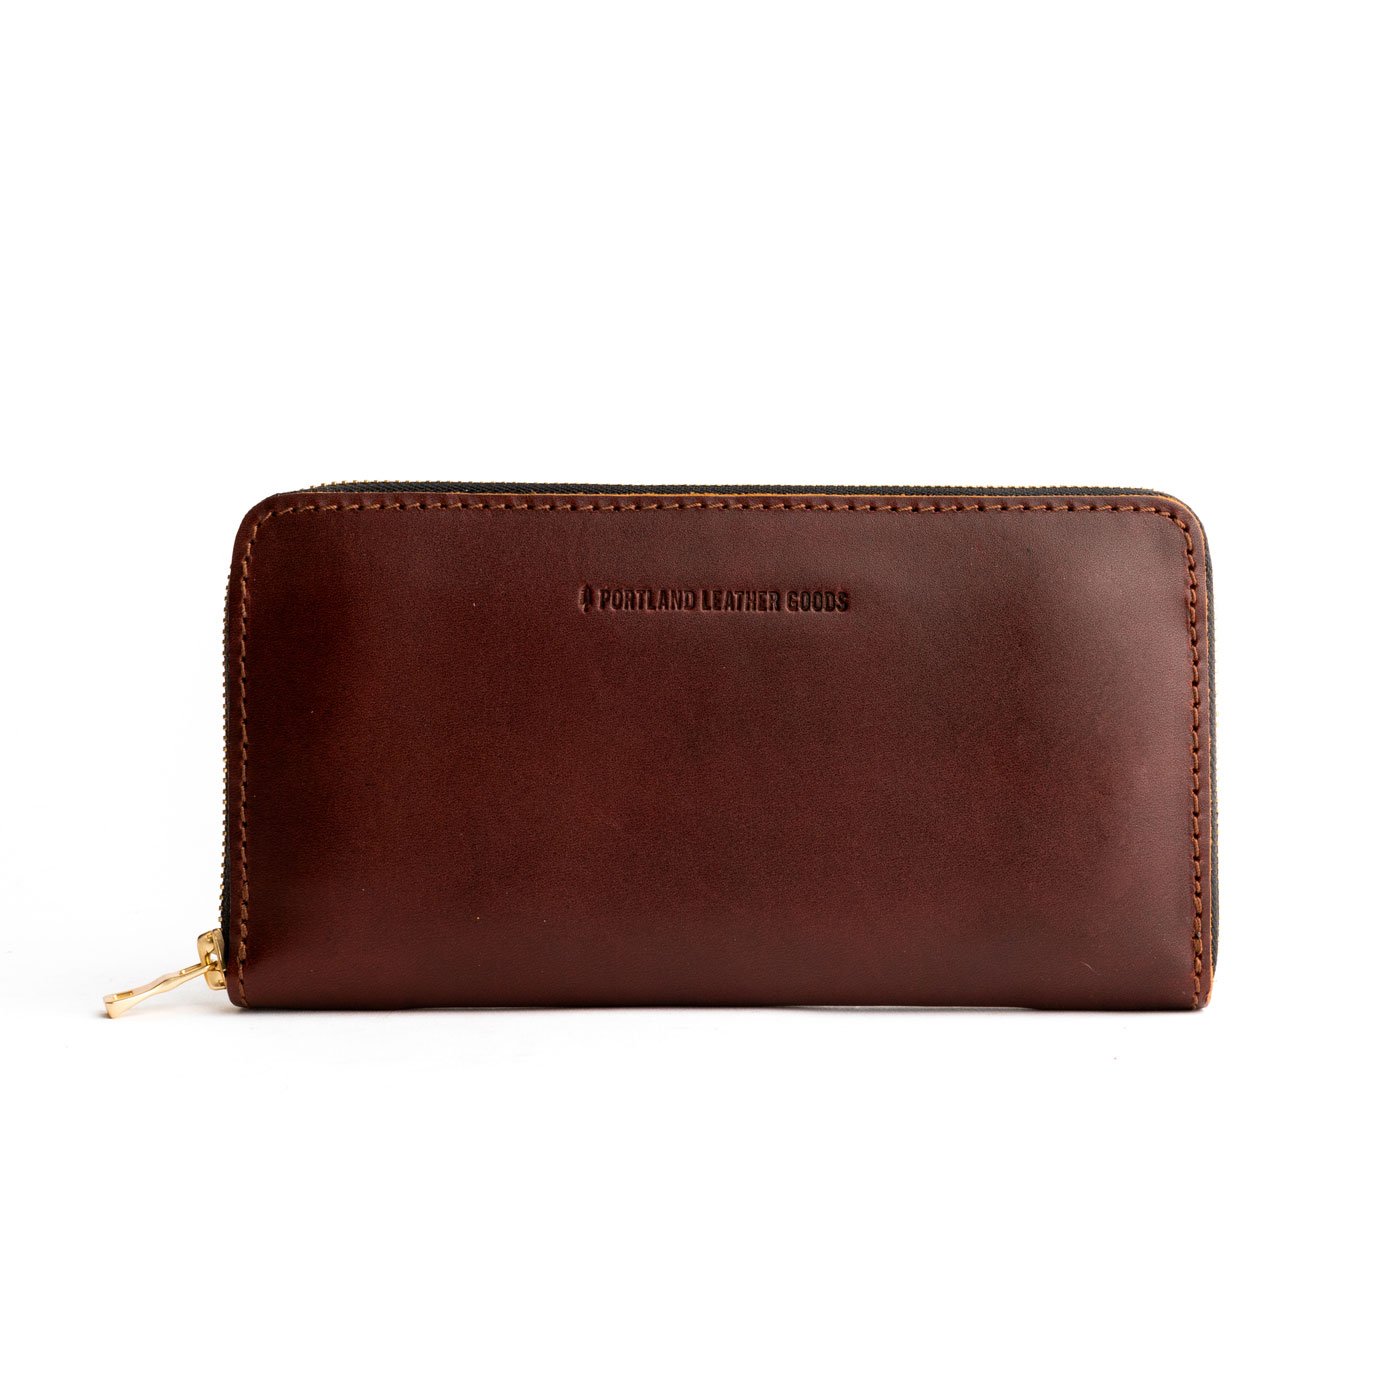 All Color: Cognac | leather handmade wallet